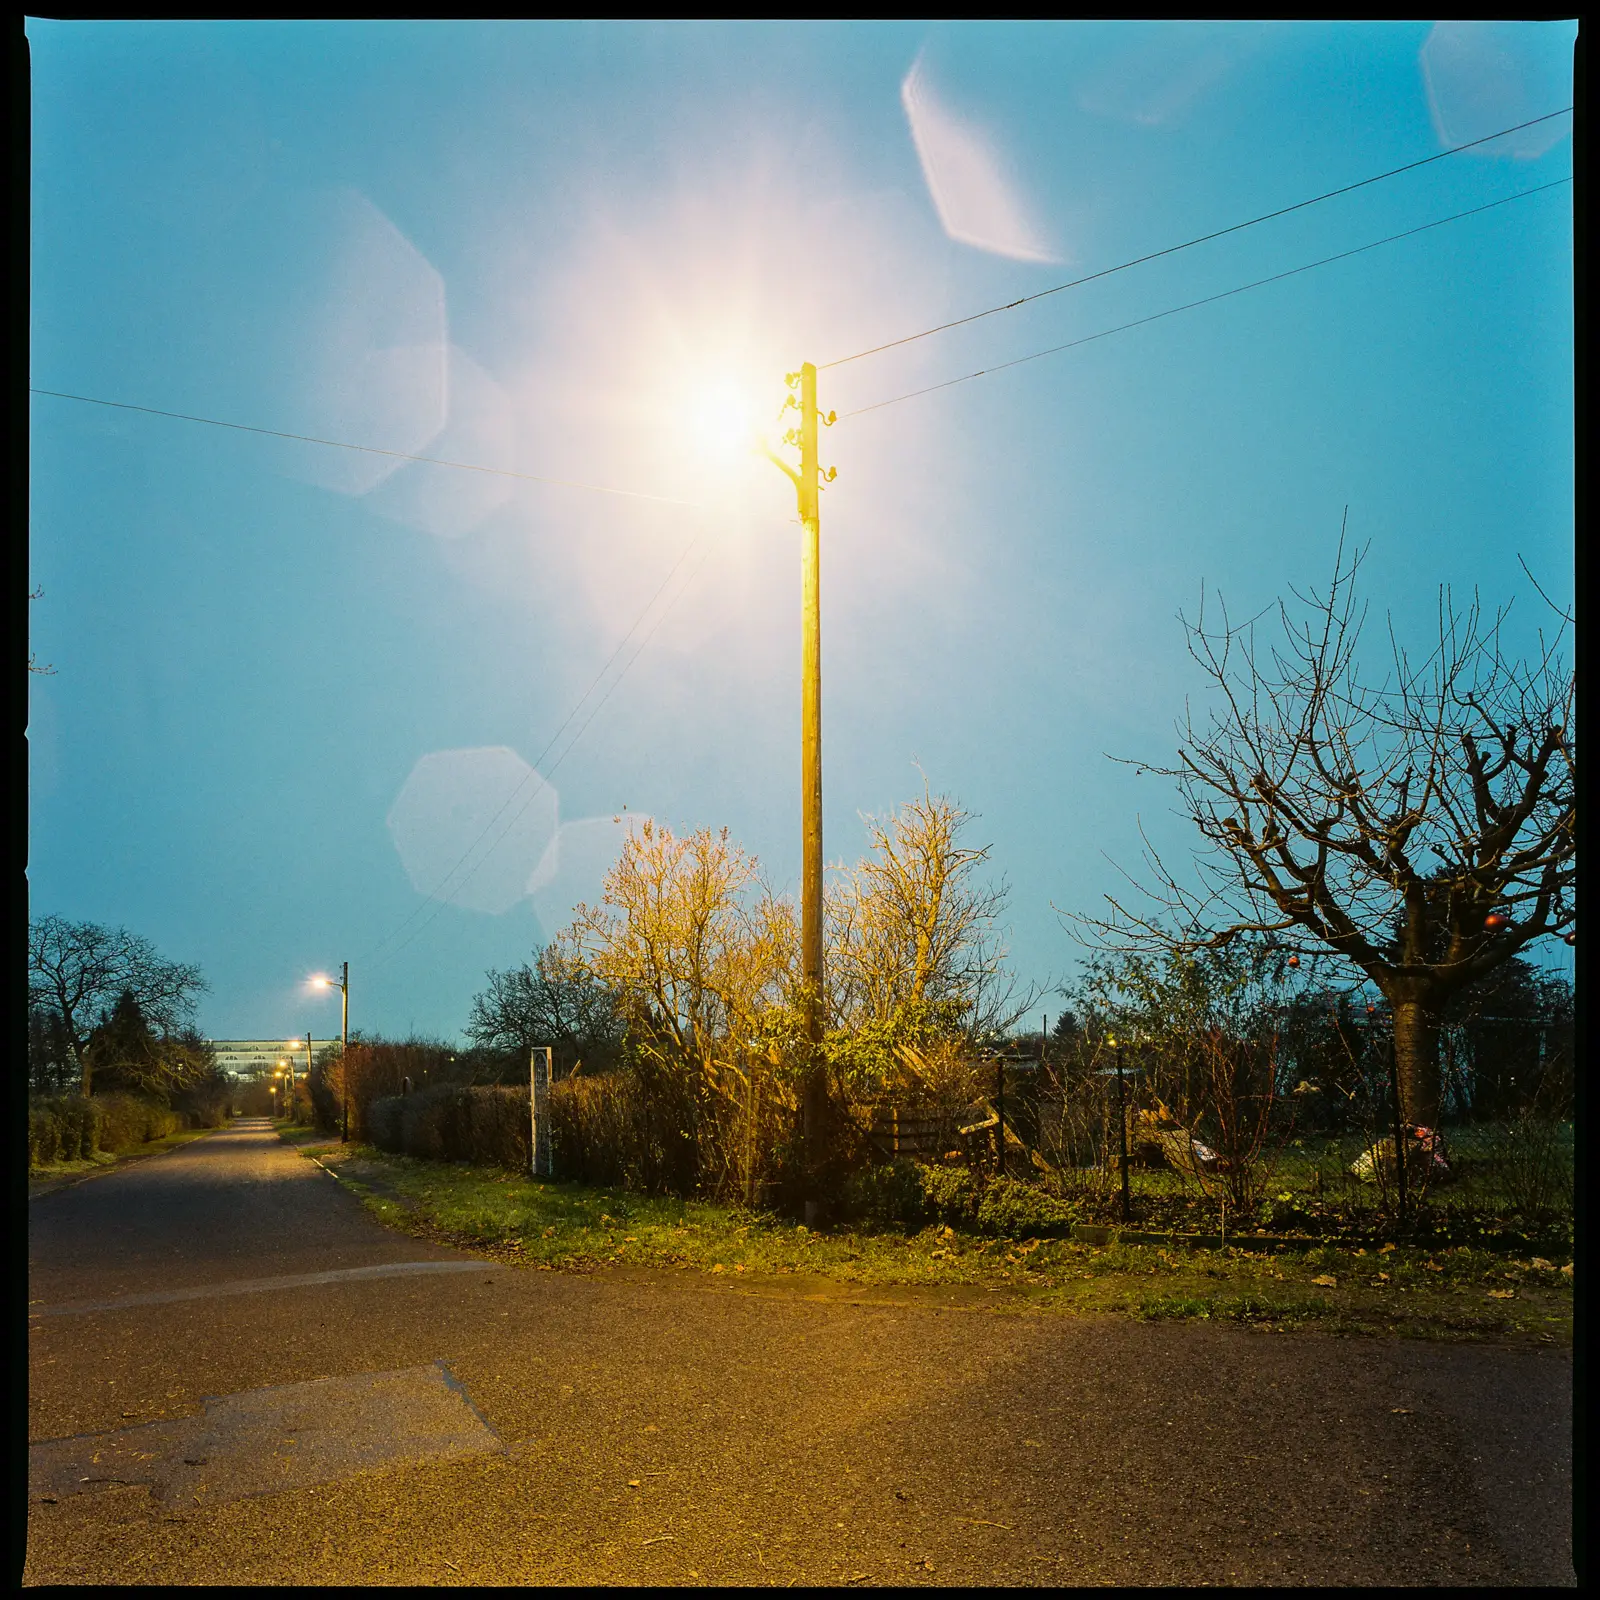 6x6 photograph of a single, orange glowing street lamp at the side of an empty road at dusk